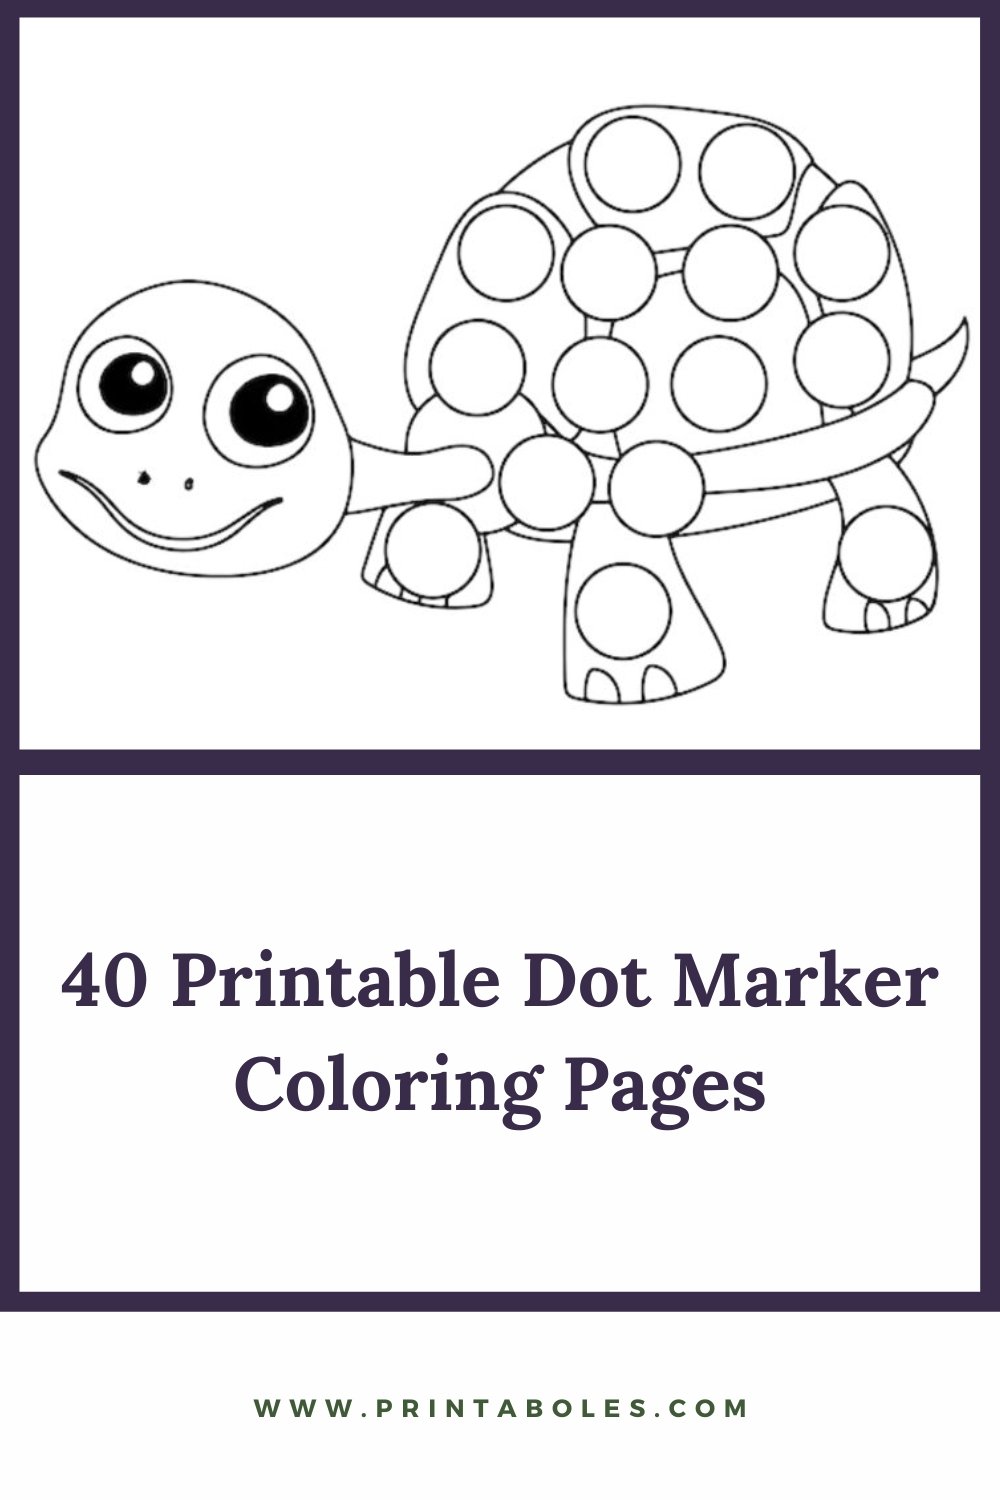 40 Free Printable Dot Marker Coloring Pages